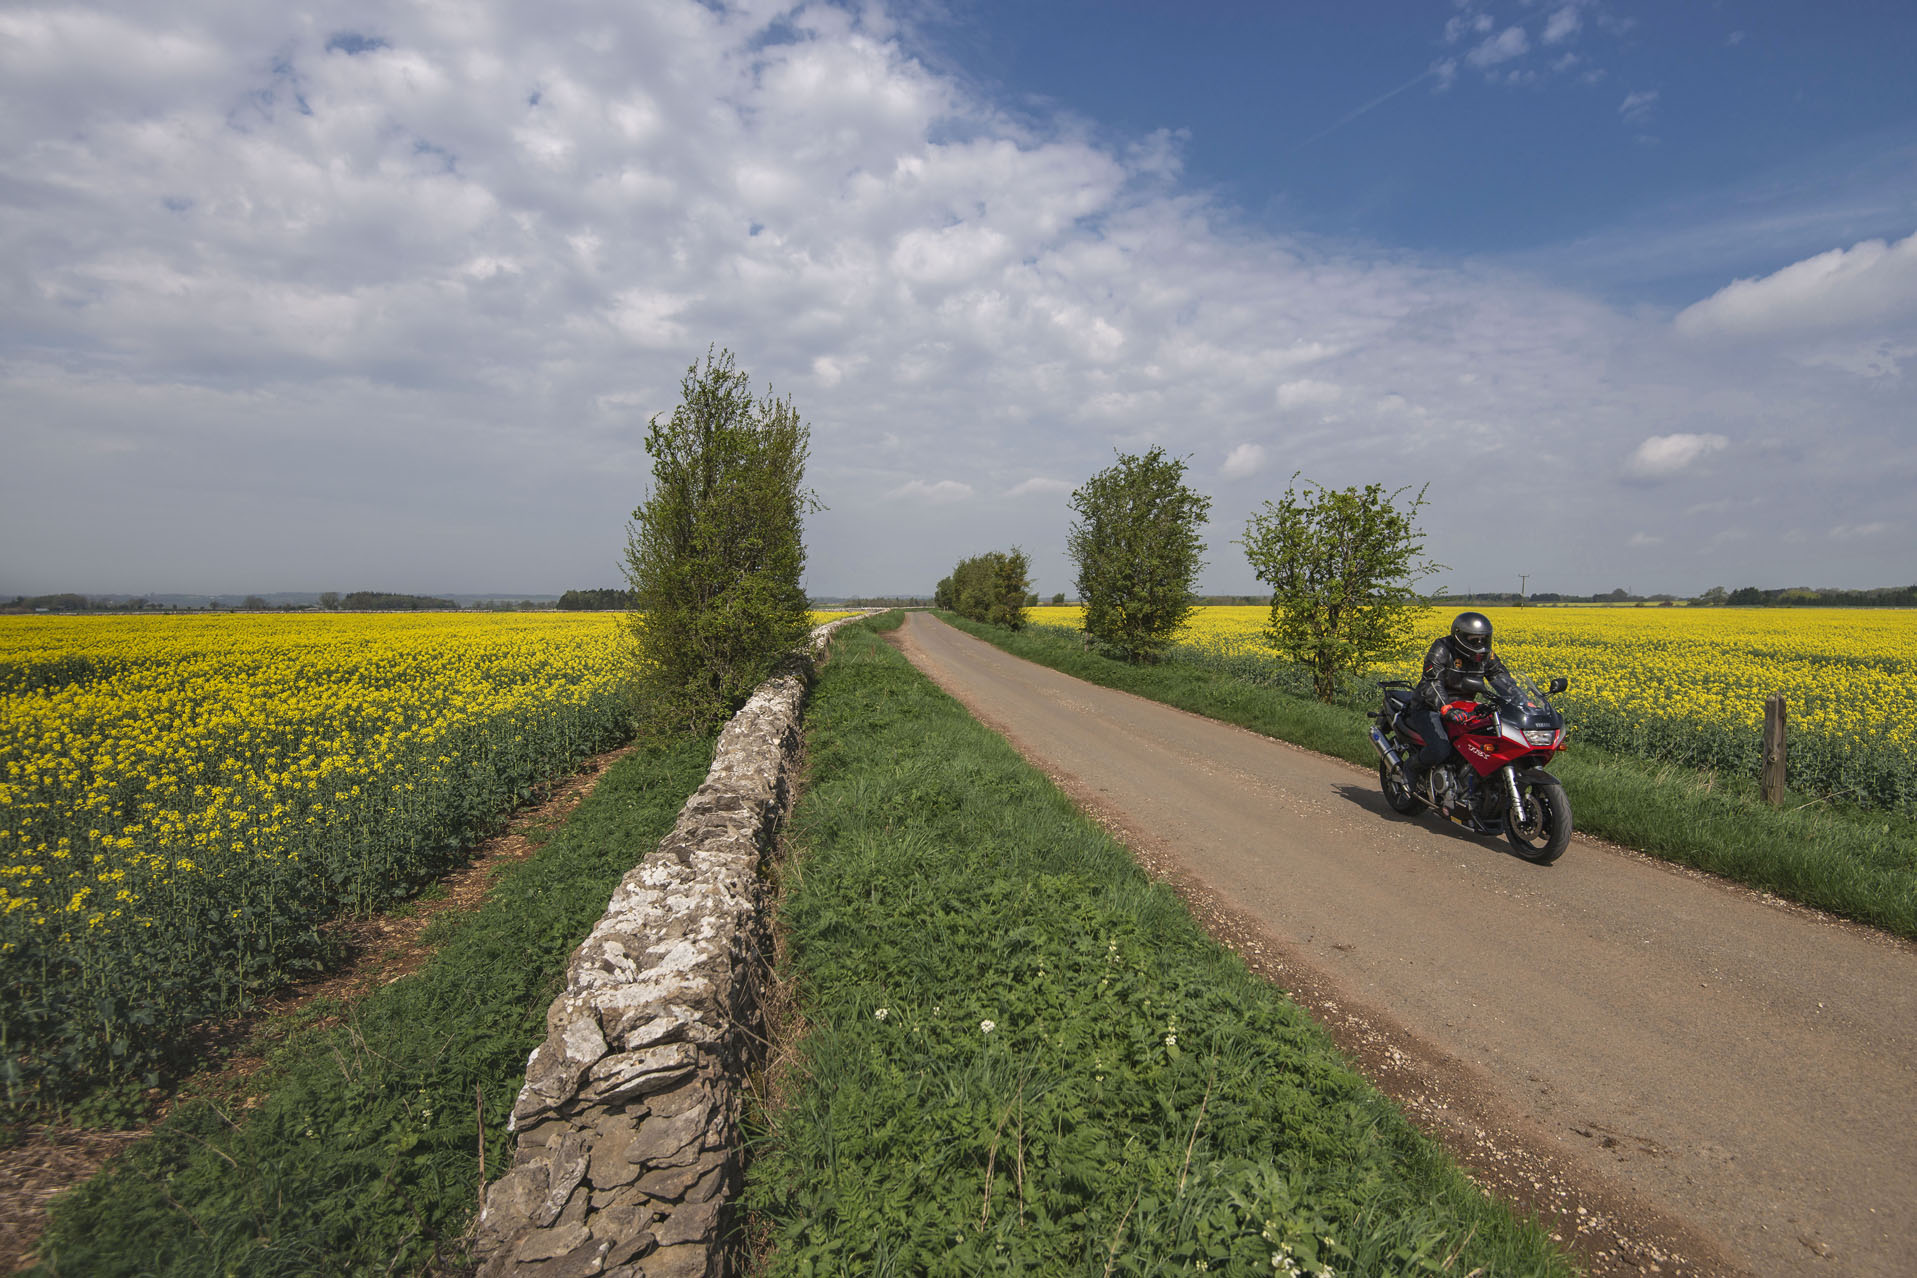 Bike whizzes down country lanes toward the Classic Motor Hub